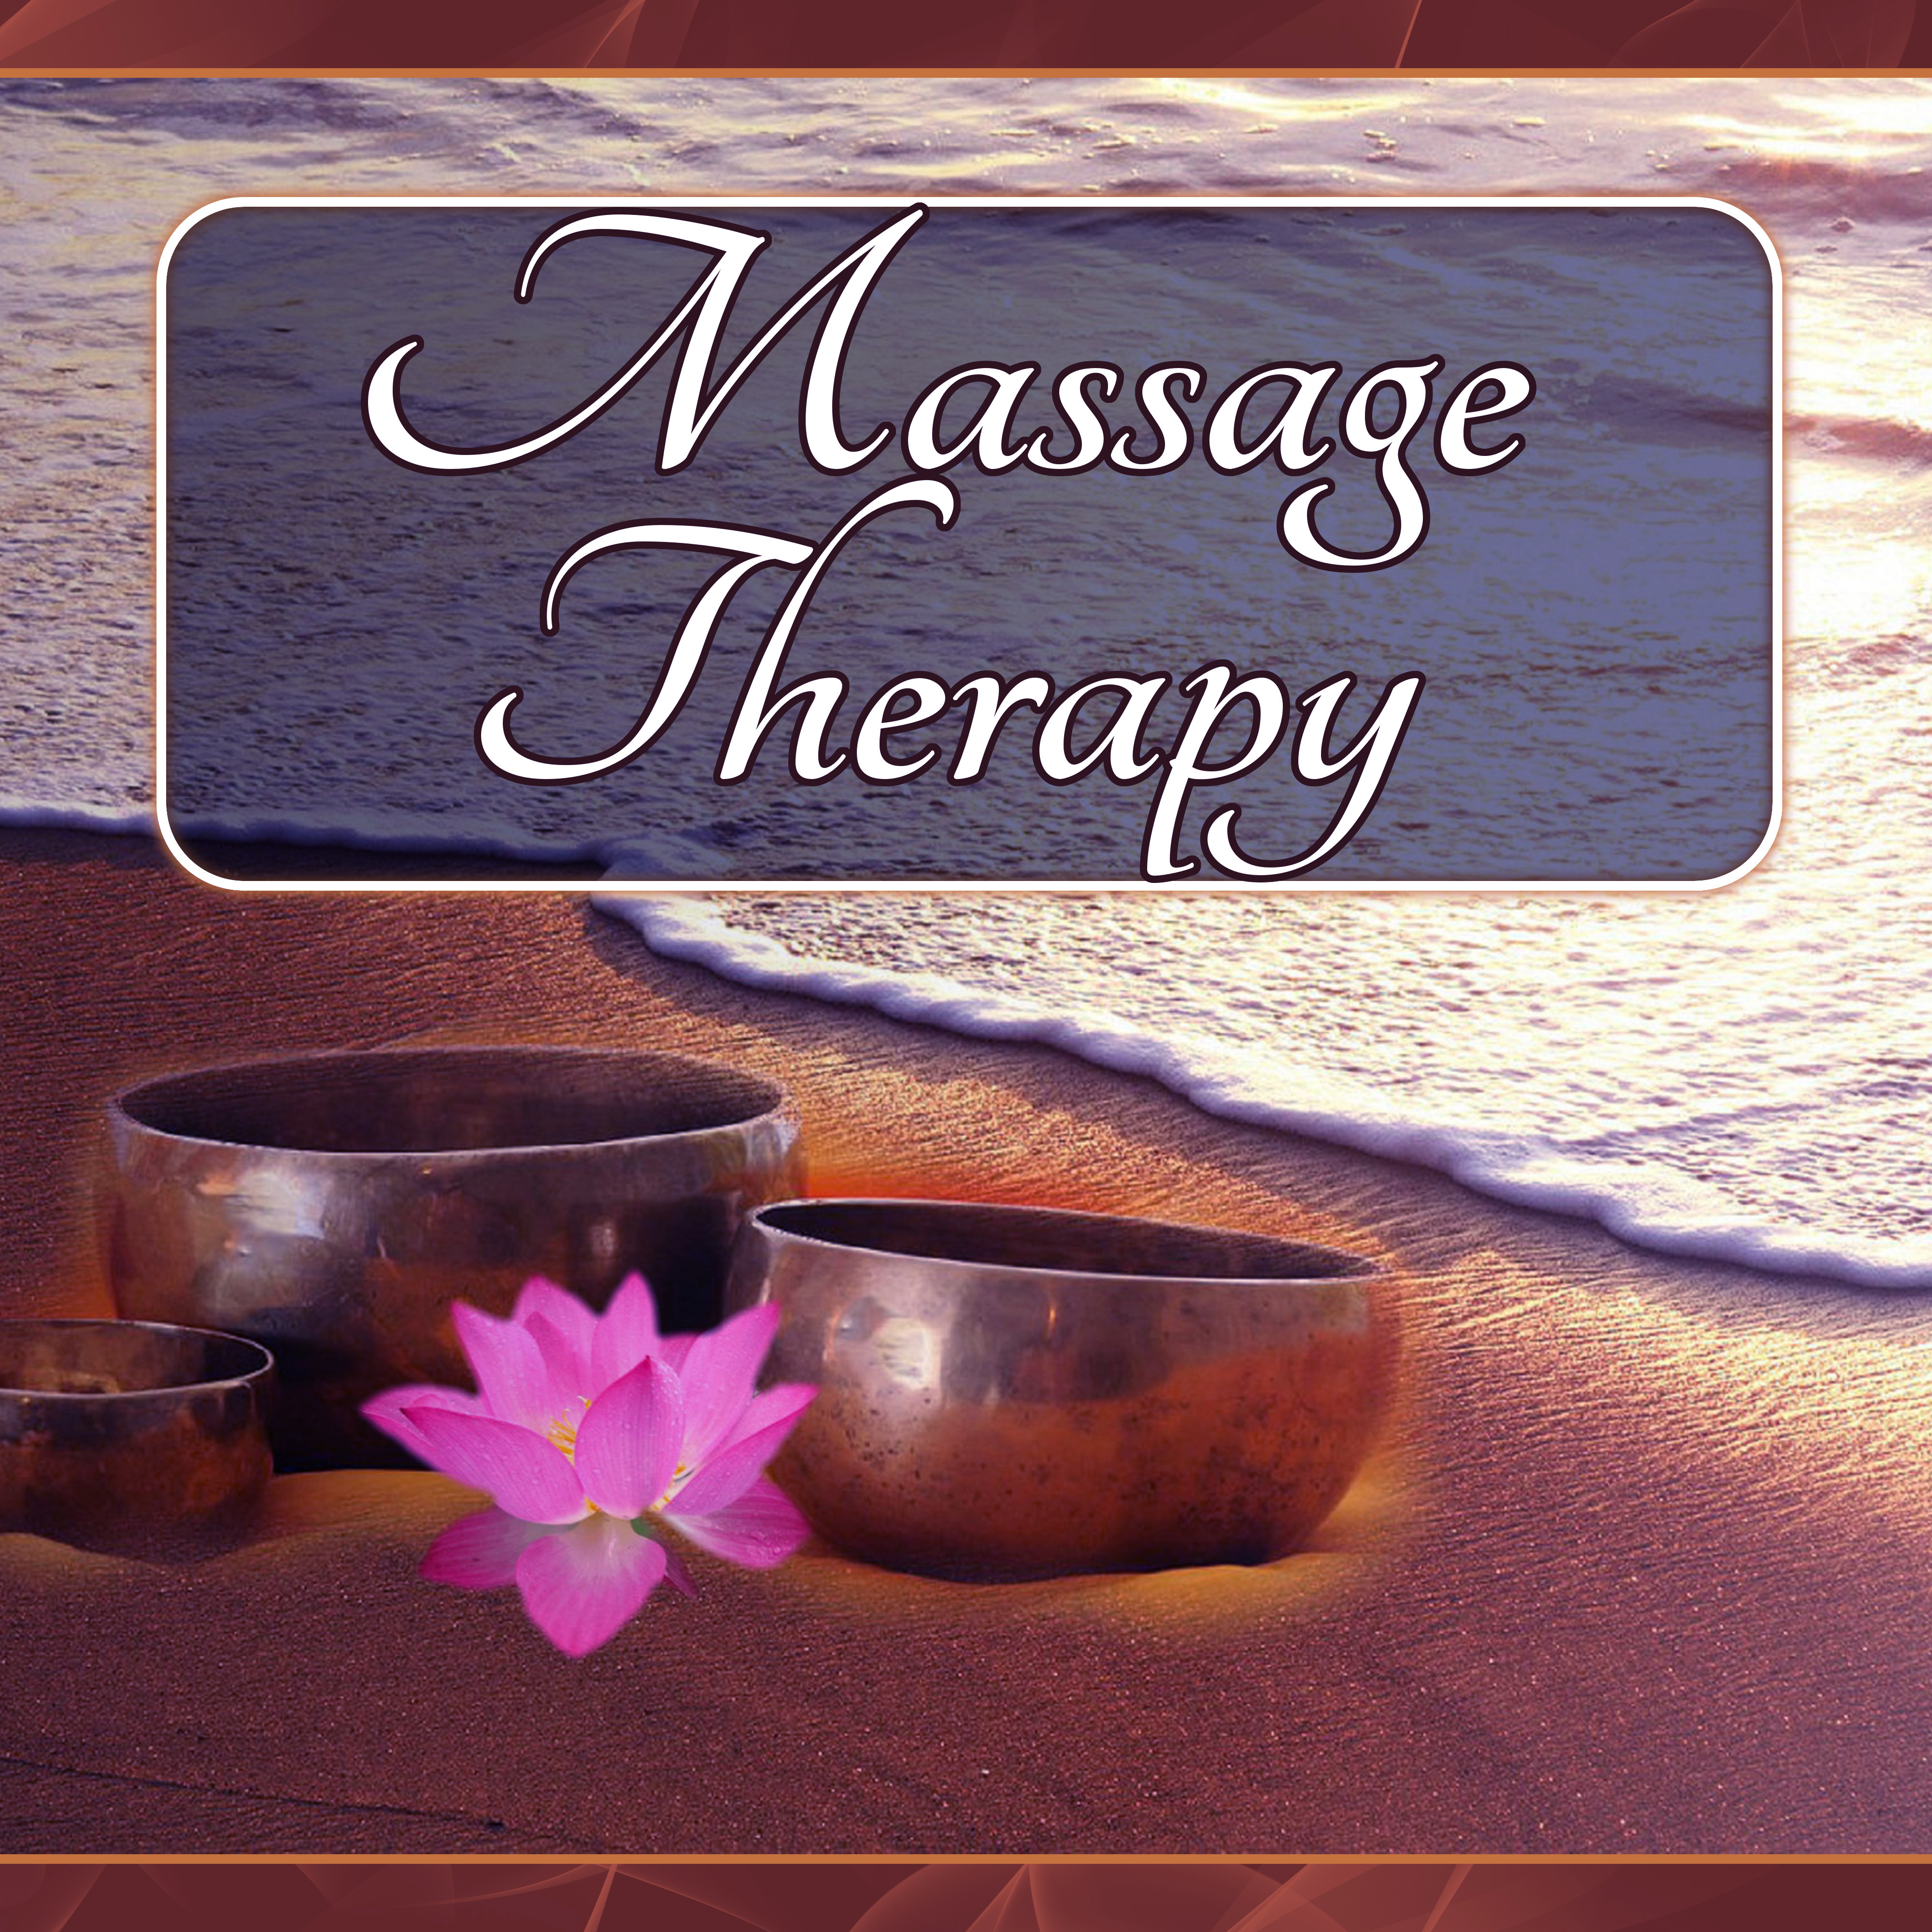 Massage Therapy - Nature Sounds with Relaxing Piano Music, Reiki Healing Music Ensemble, Music for Healing Through Sound and Touch, Therapeutic Massage, Day Spa and Relaxation